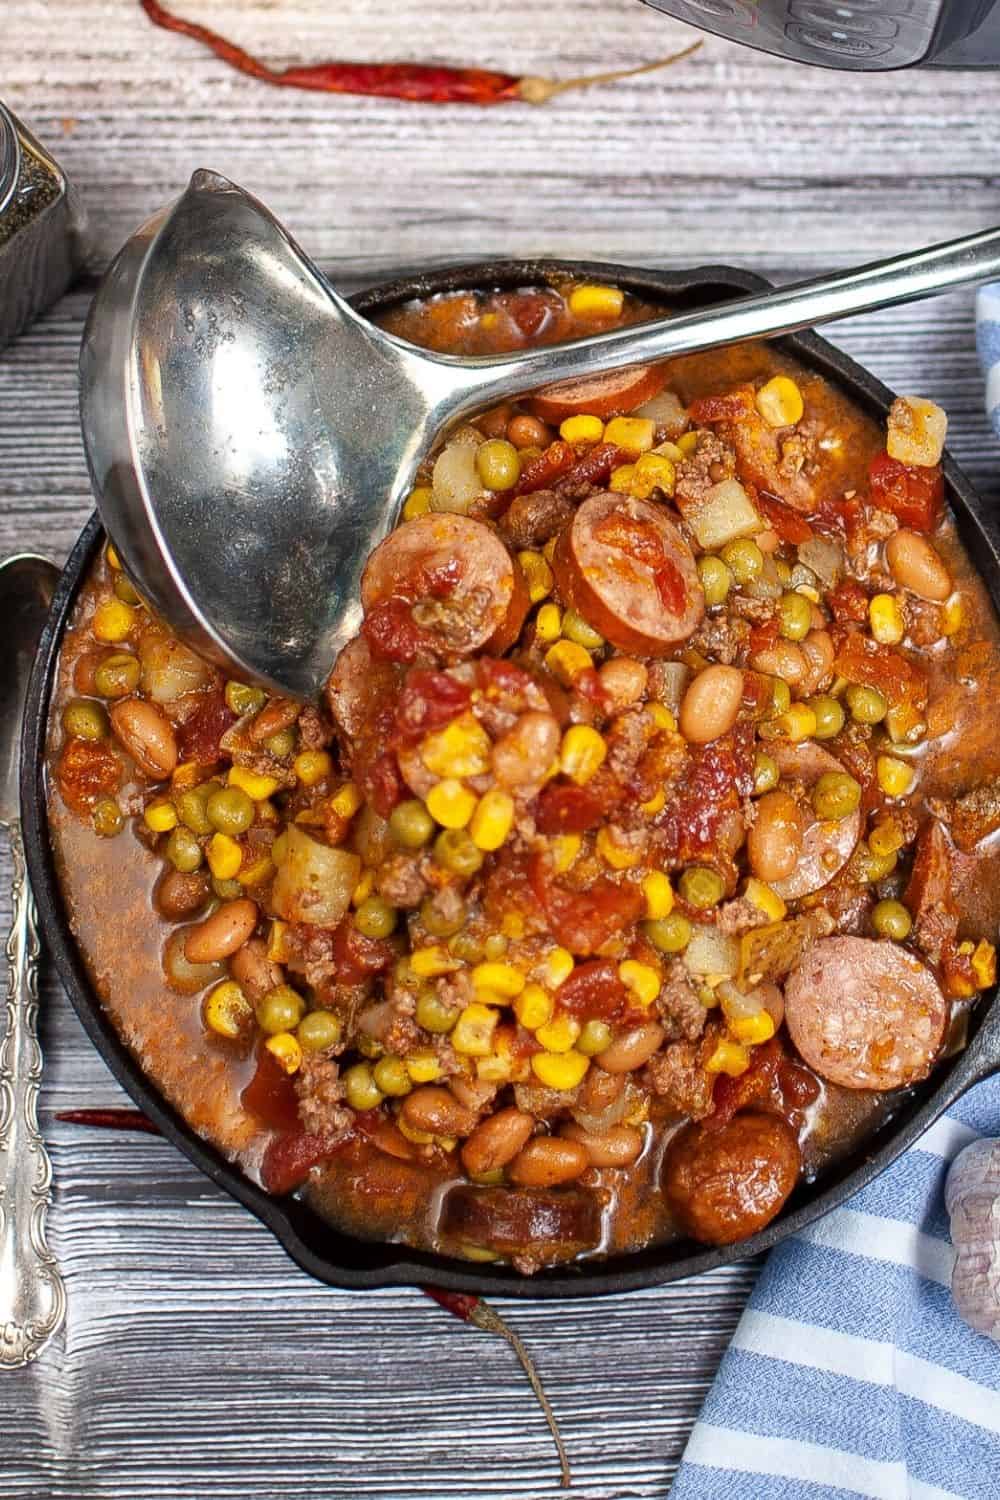 overhead view of a cast iron skillet full of cowboy stew, with a ladle resting on the dish.